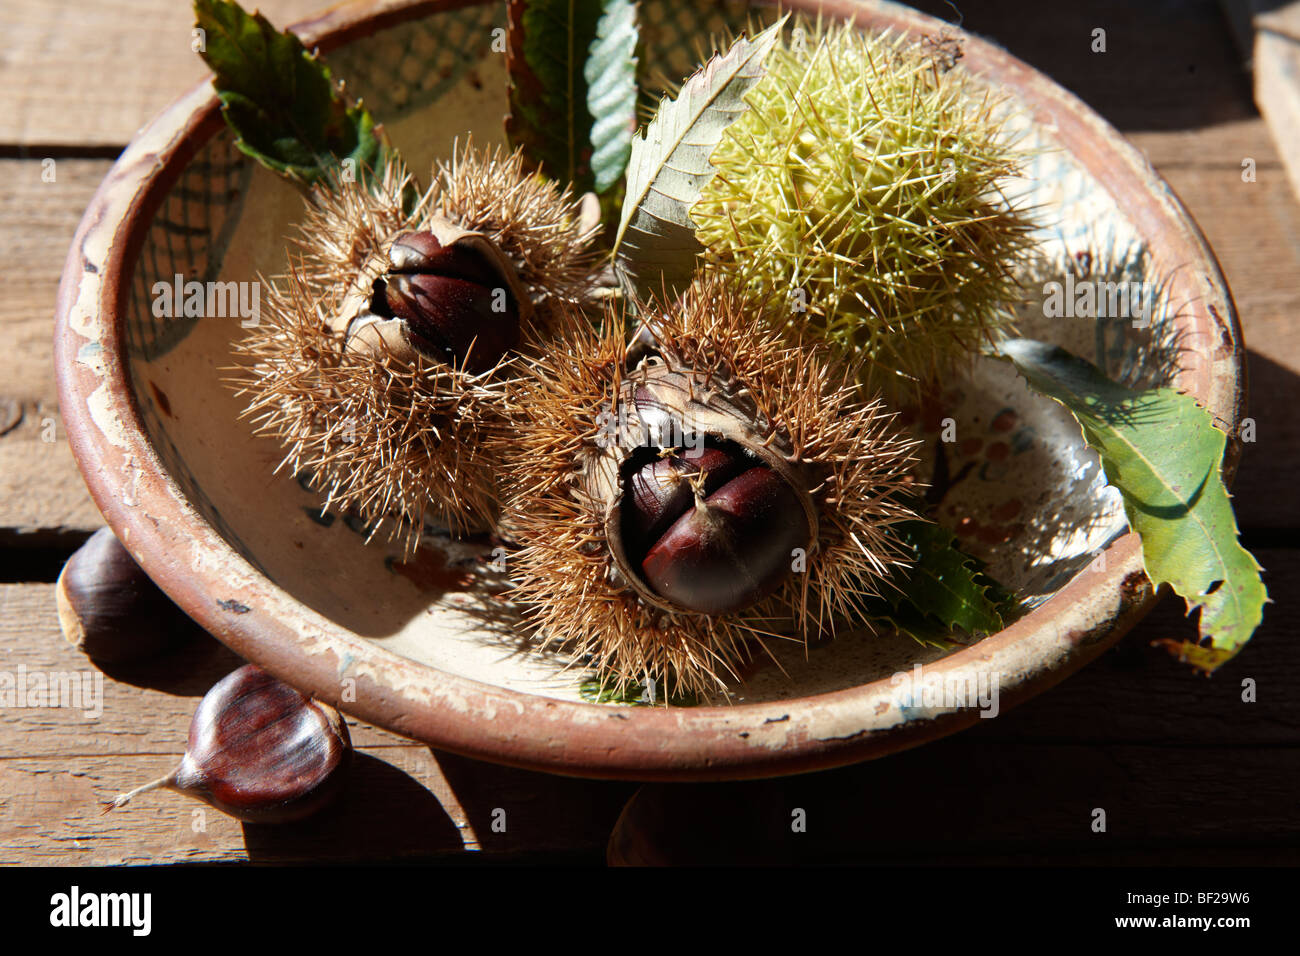 Fresh harvested Chestnut fruits and in shells (Castanea sativa) Stock Photo